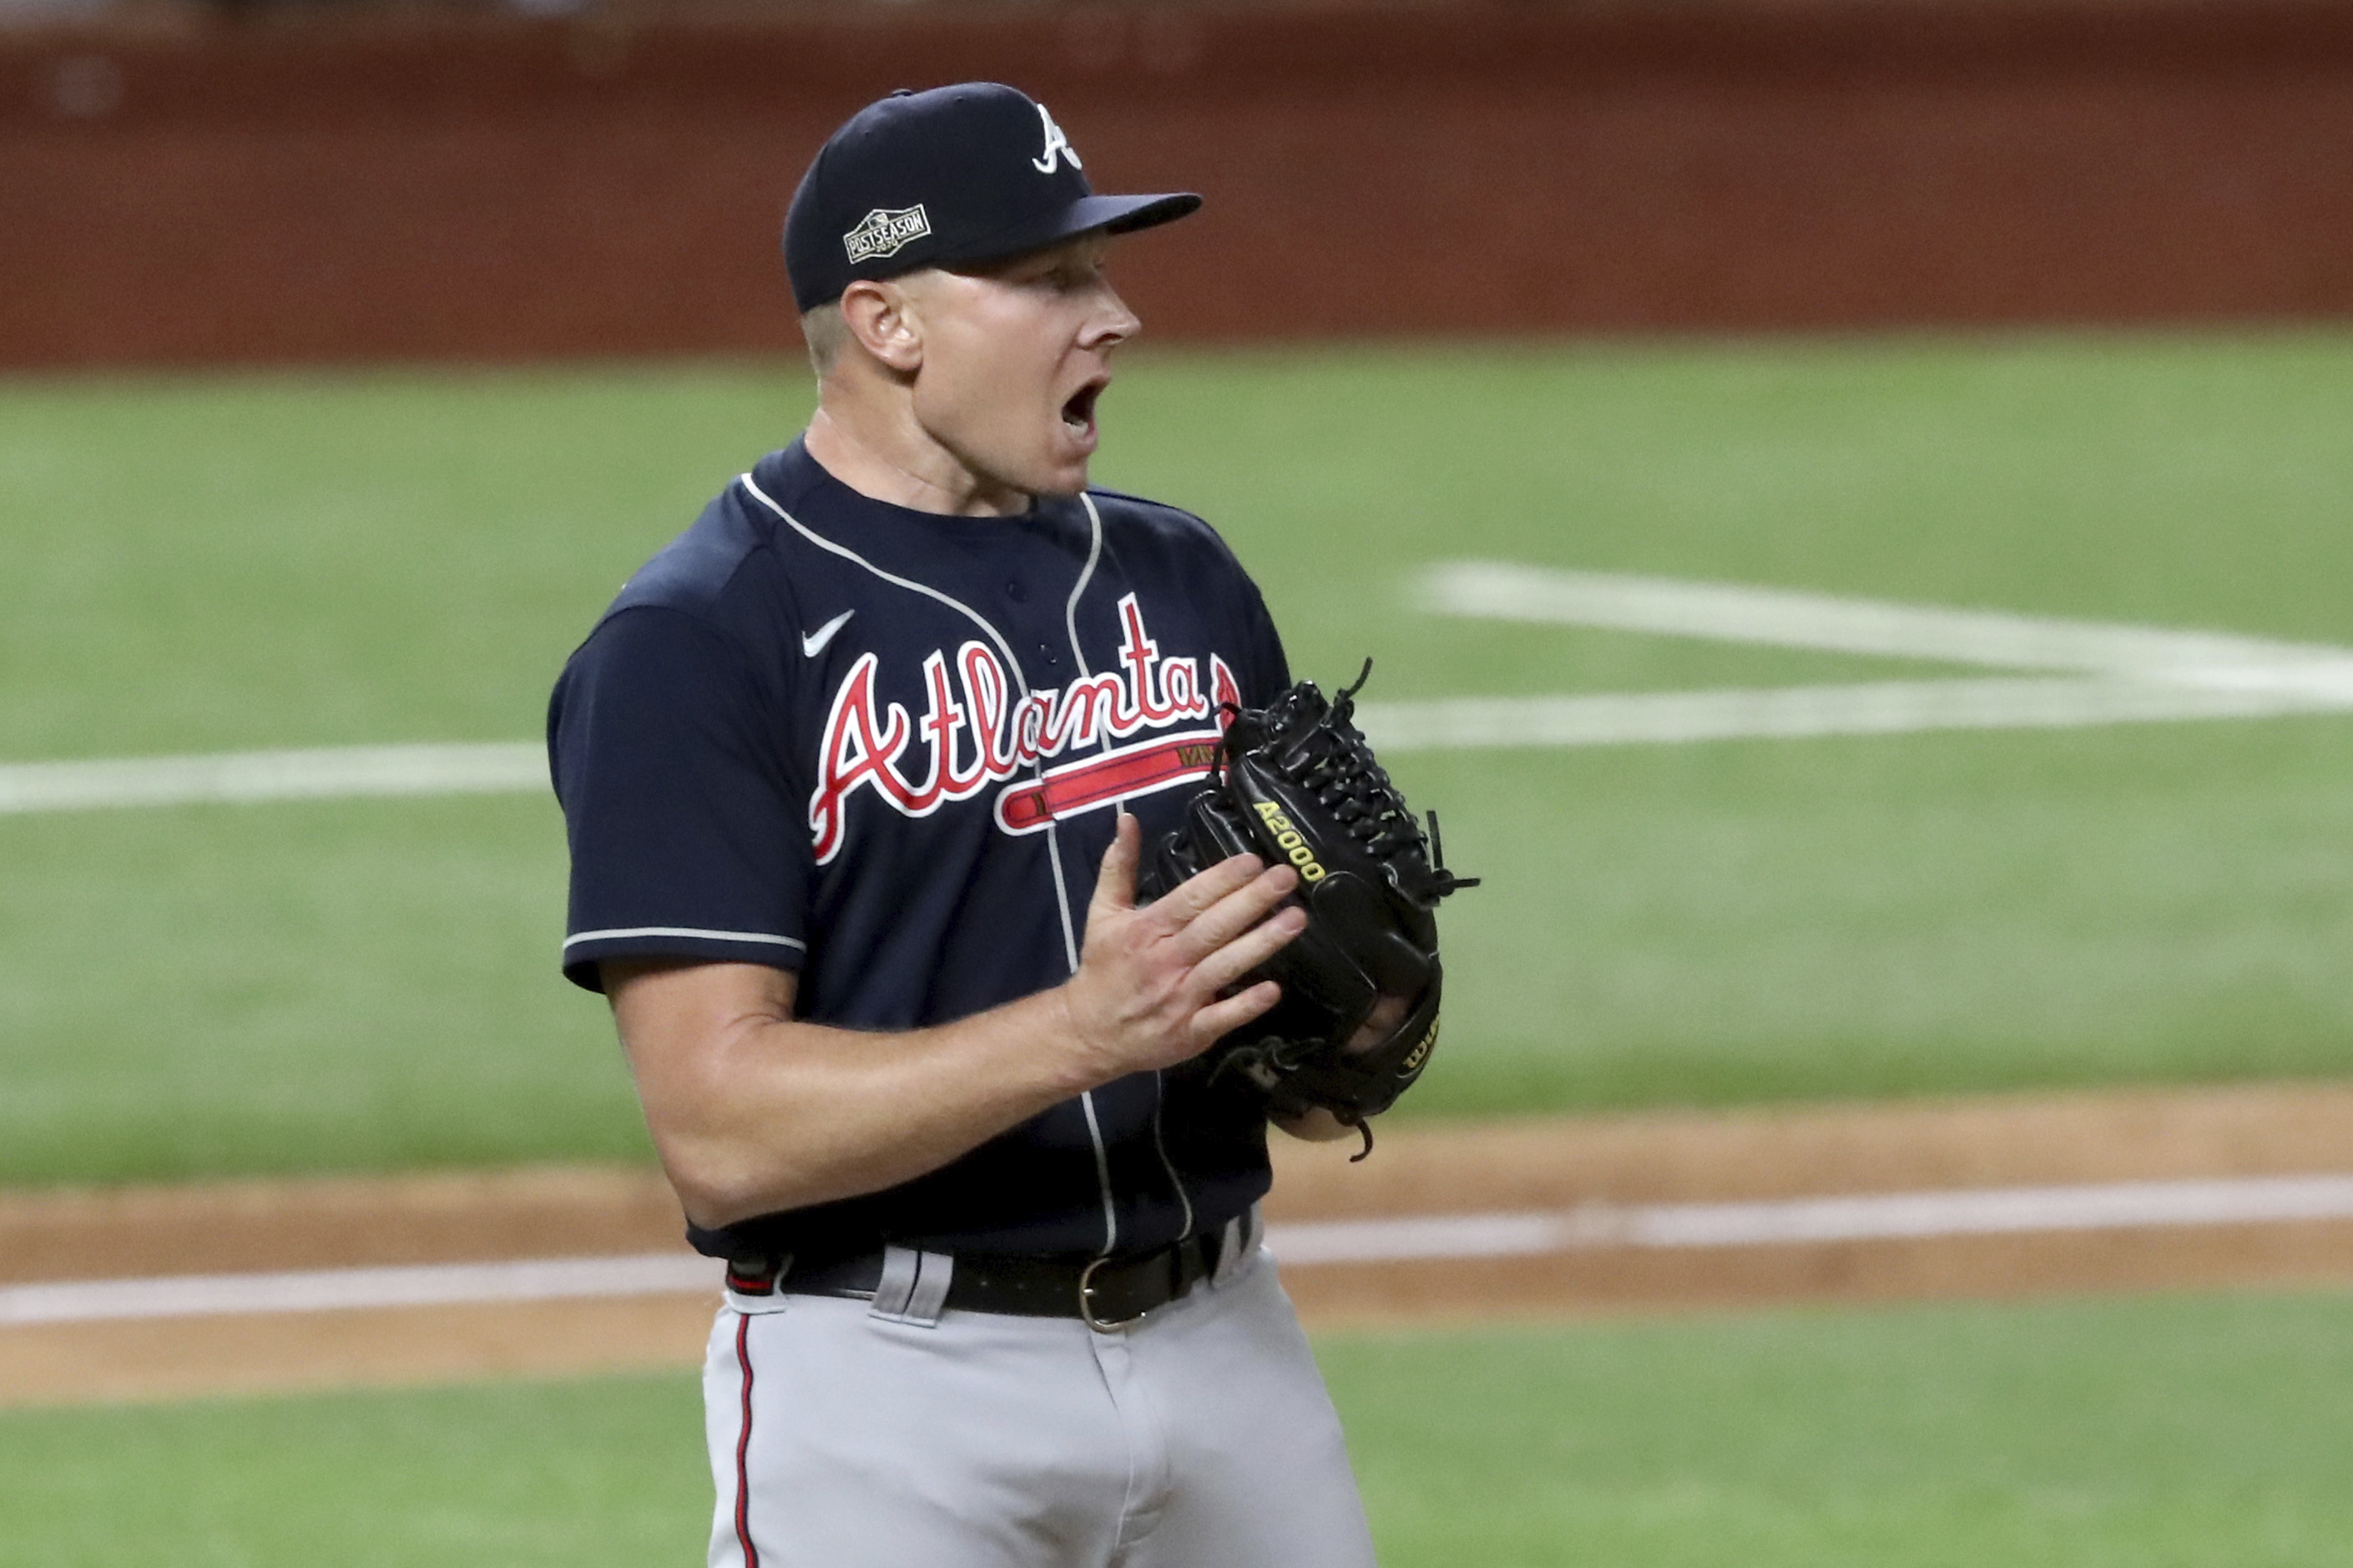 Dodgers lose to Braves on another walk-off single, trail NLCS 2-0